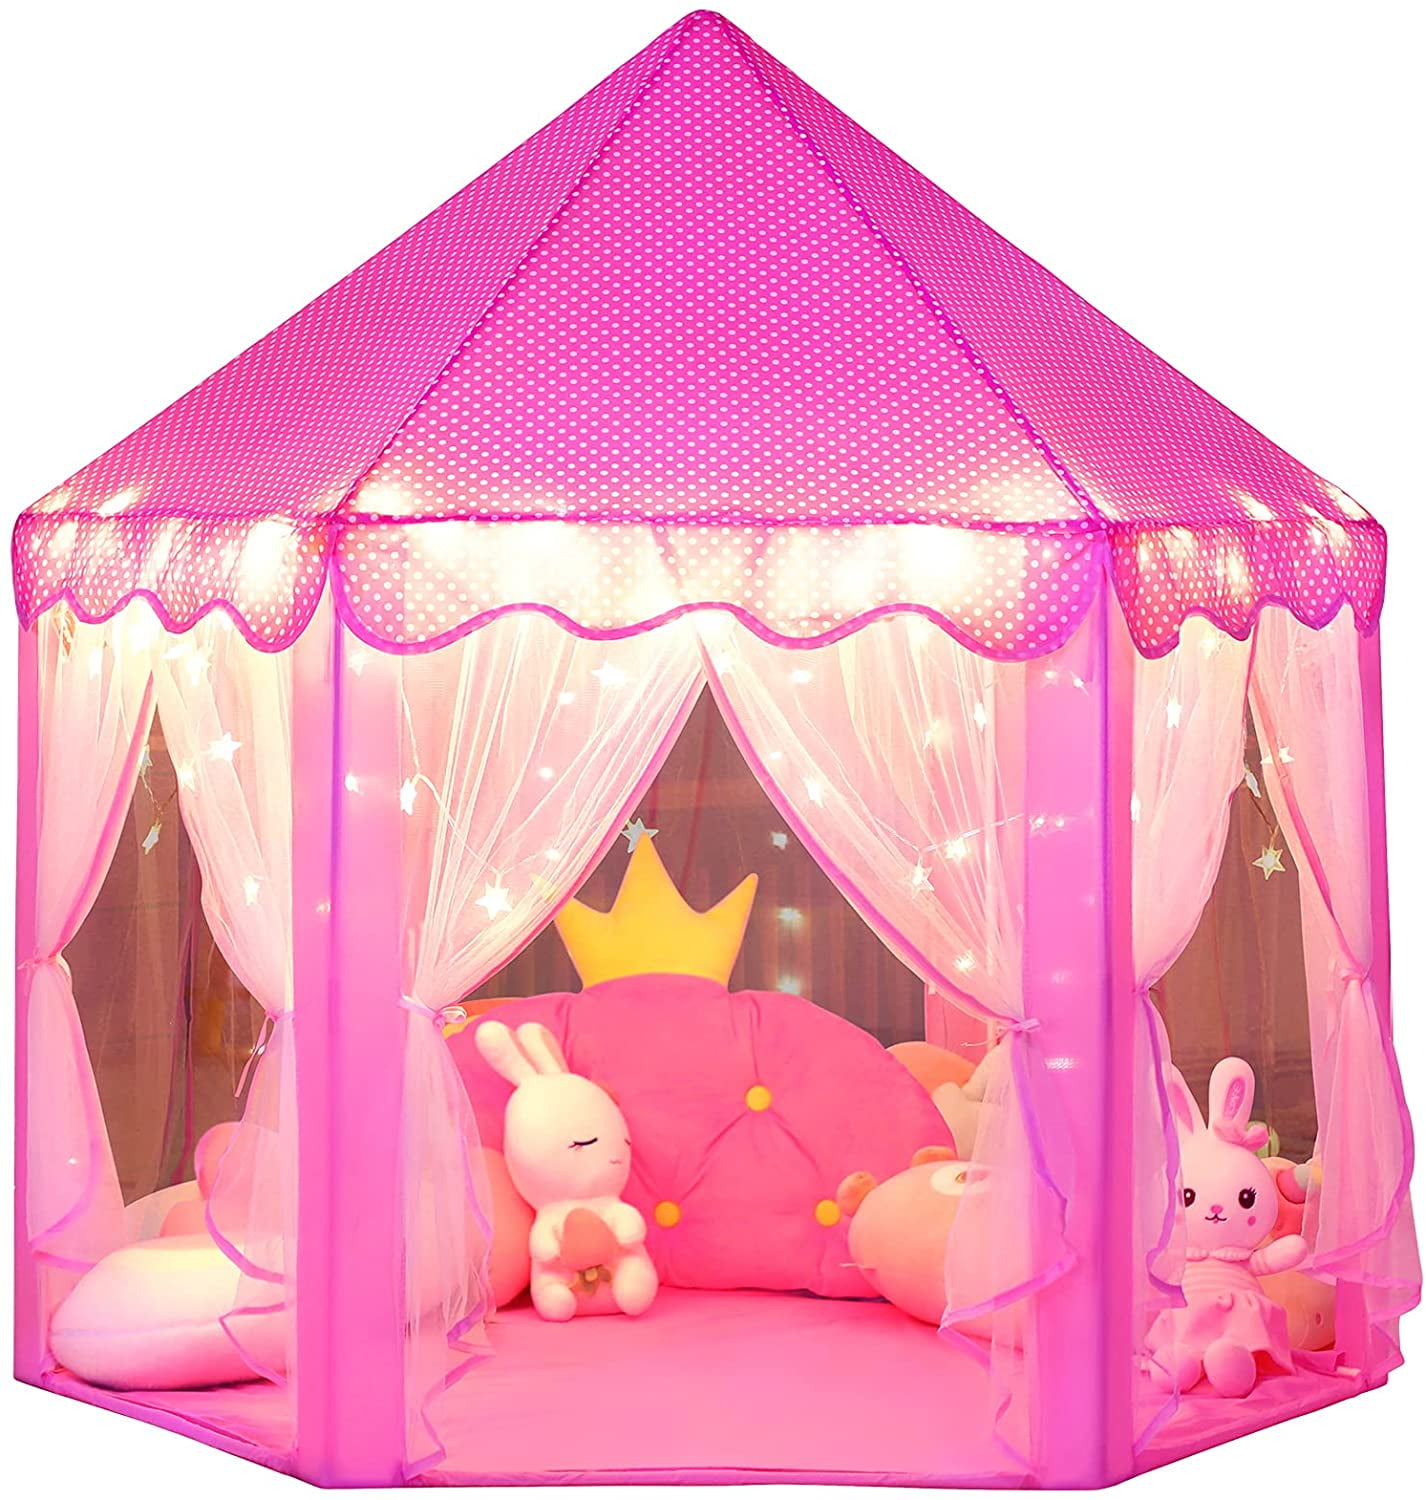 Play Tent Portable Folding Pop Up Kids Girl Princess Castle Outdoor House Pink 